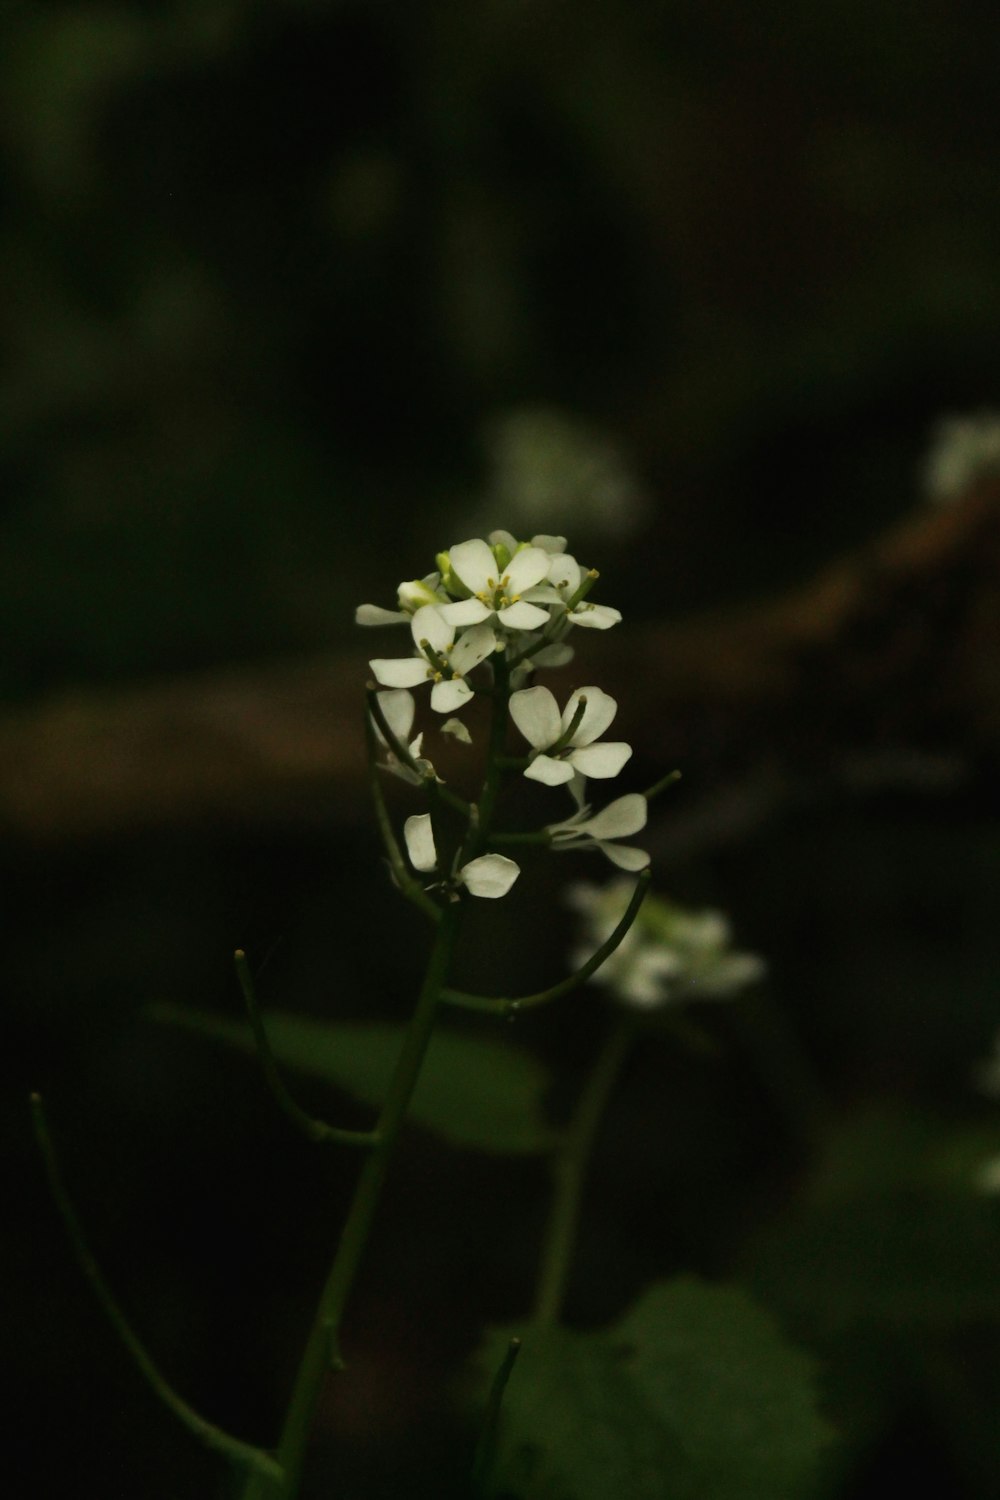 a small white flower with green leaves in the background